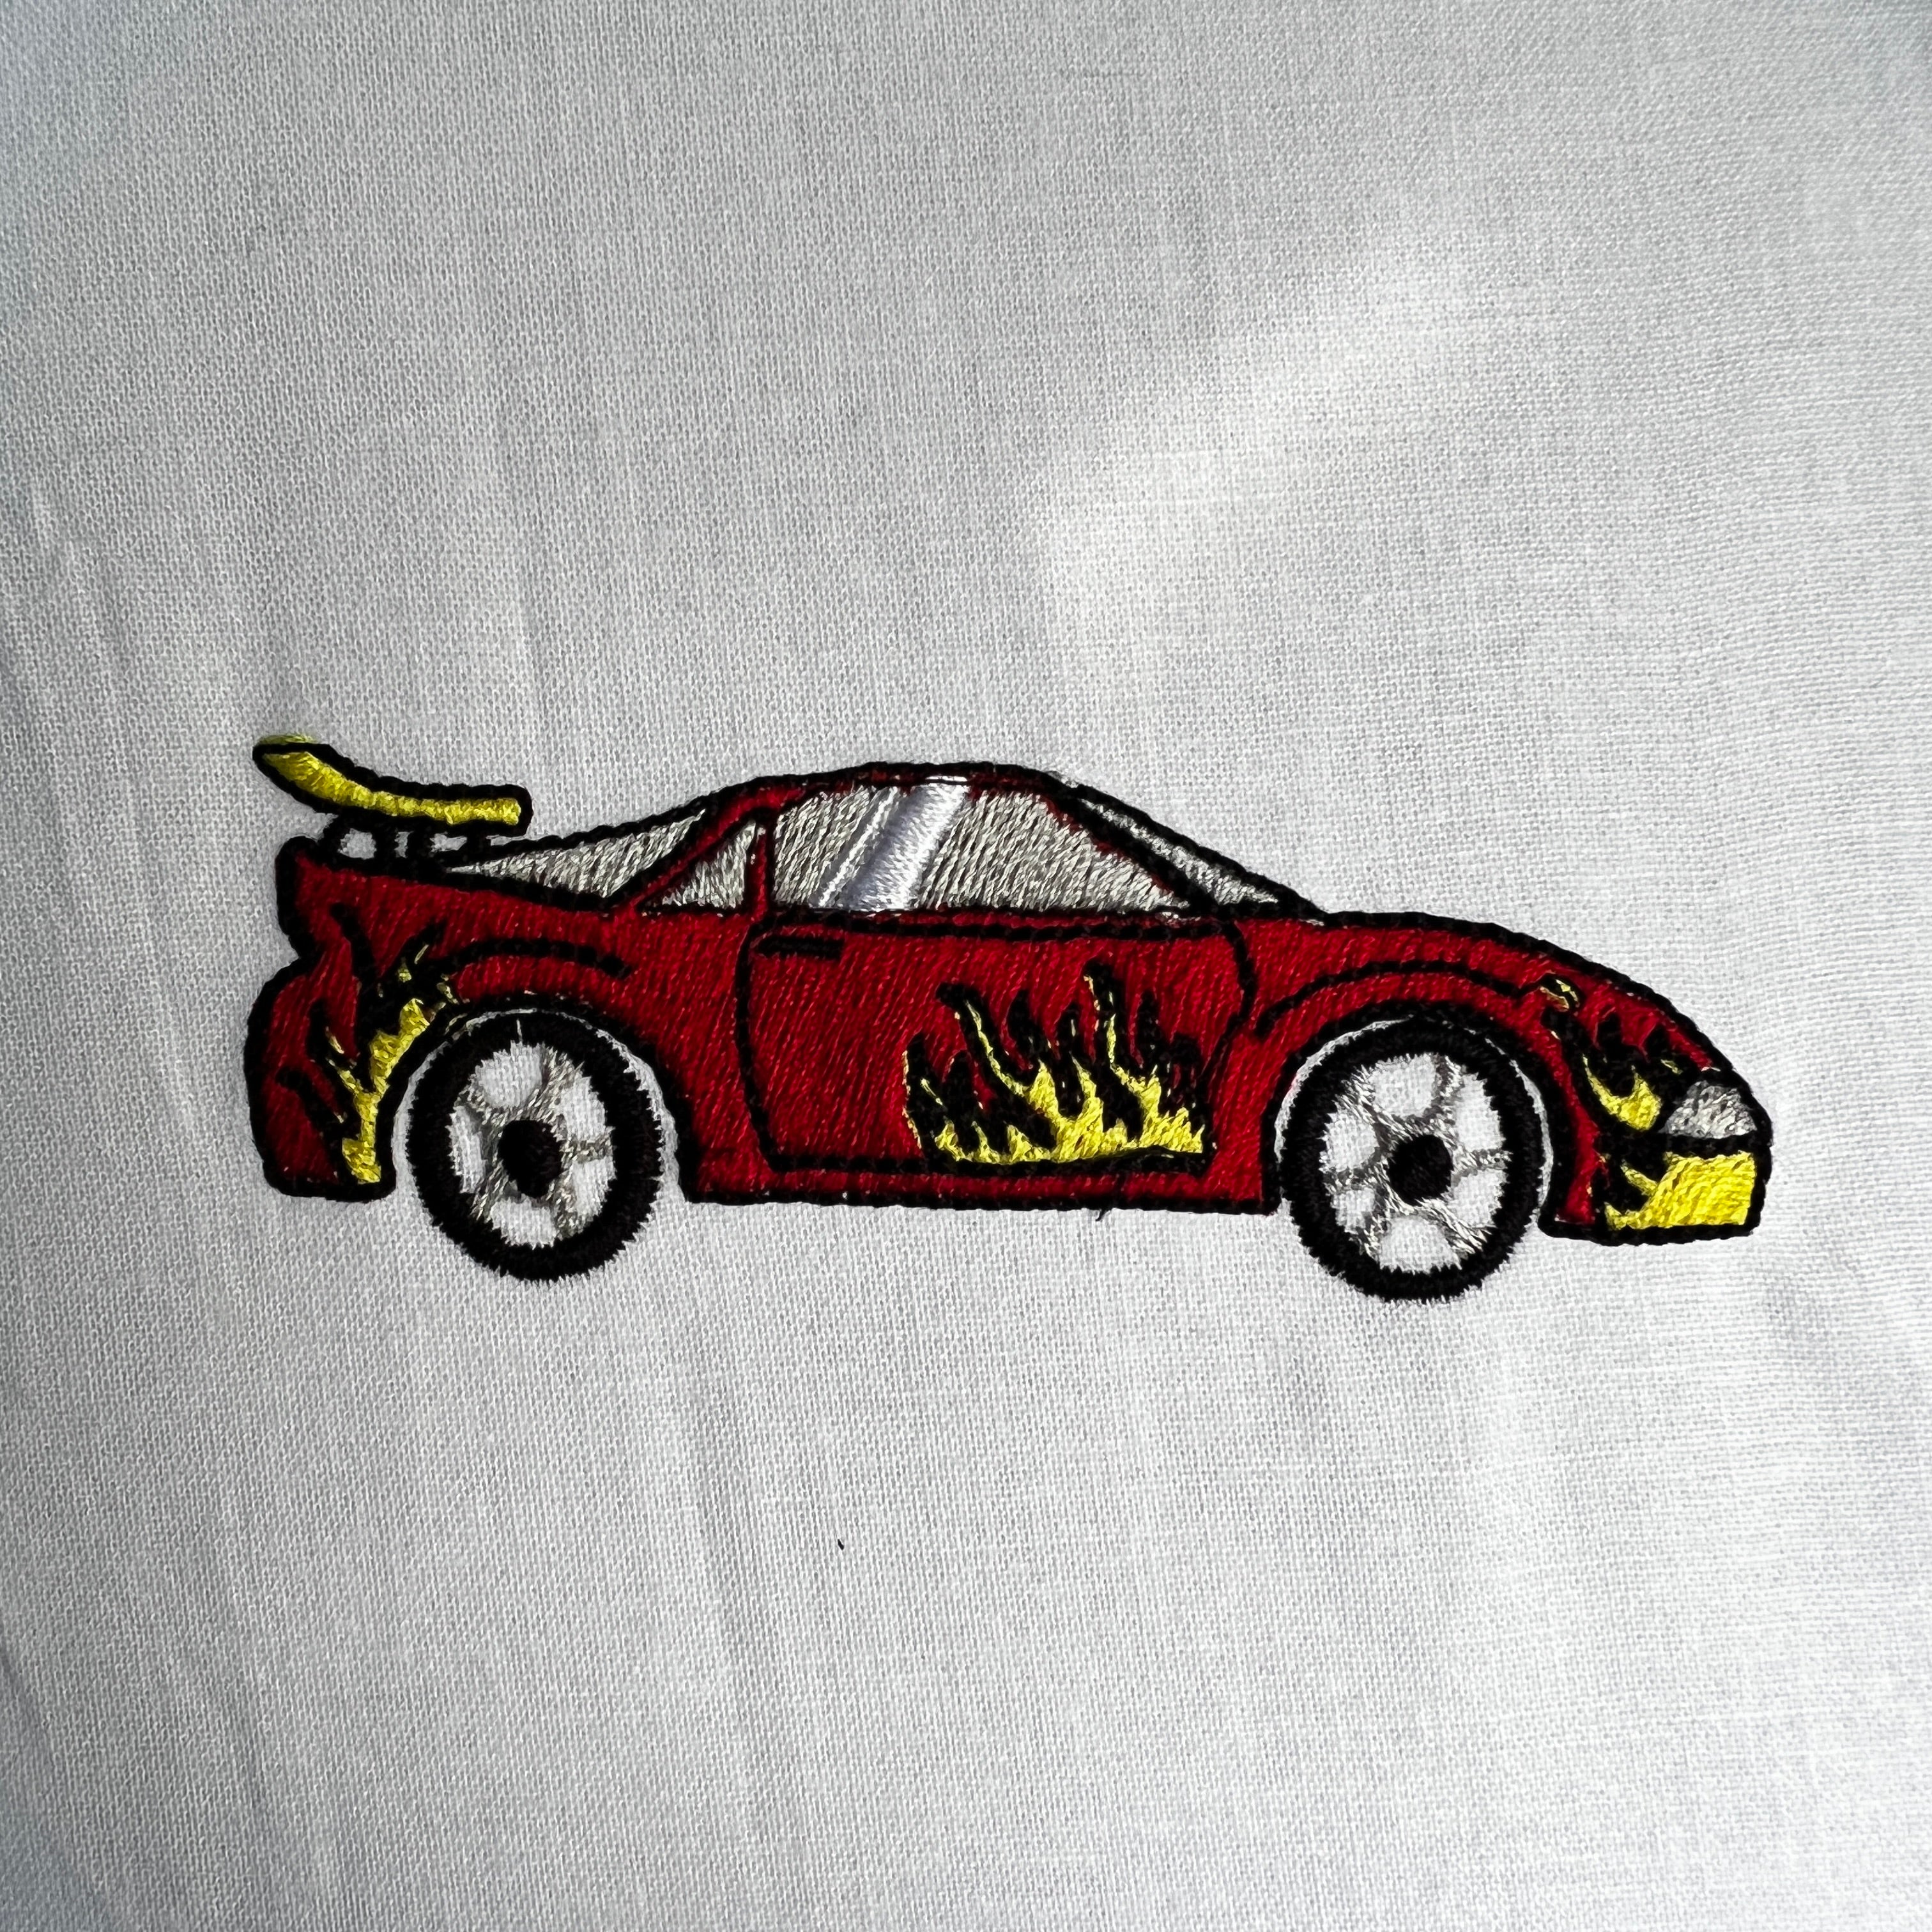 Race Car .Dst Embroidery Design